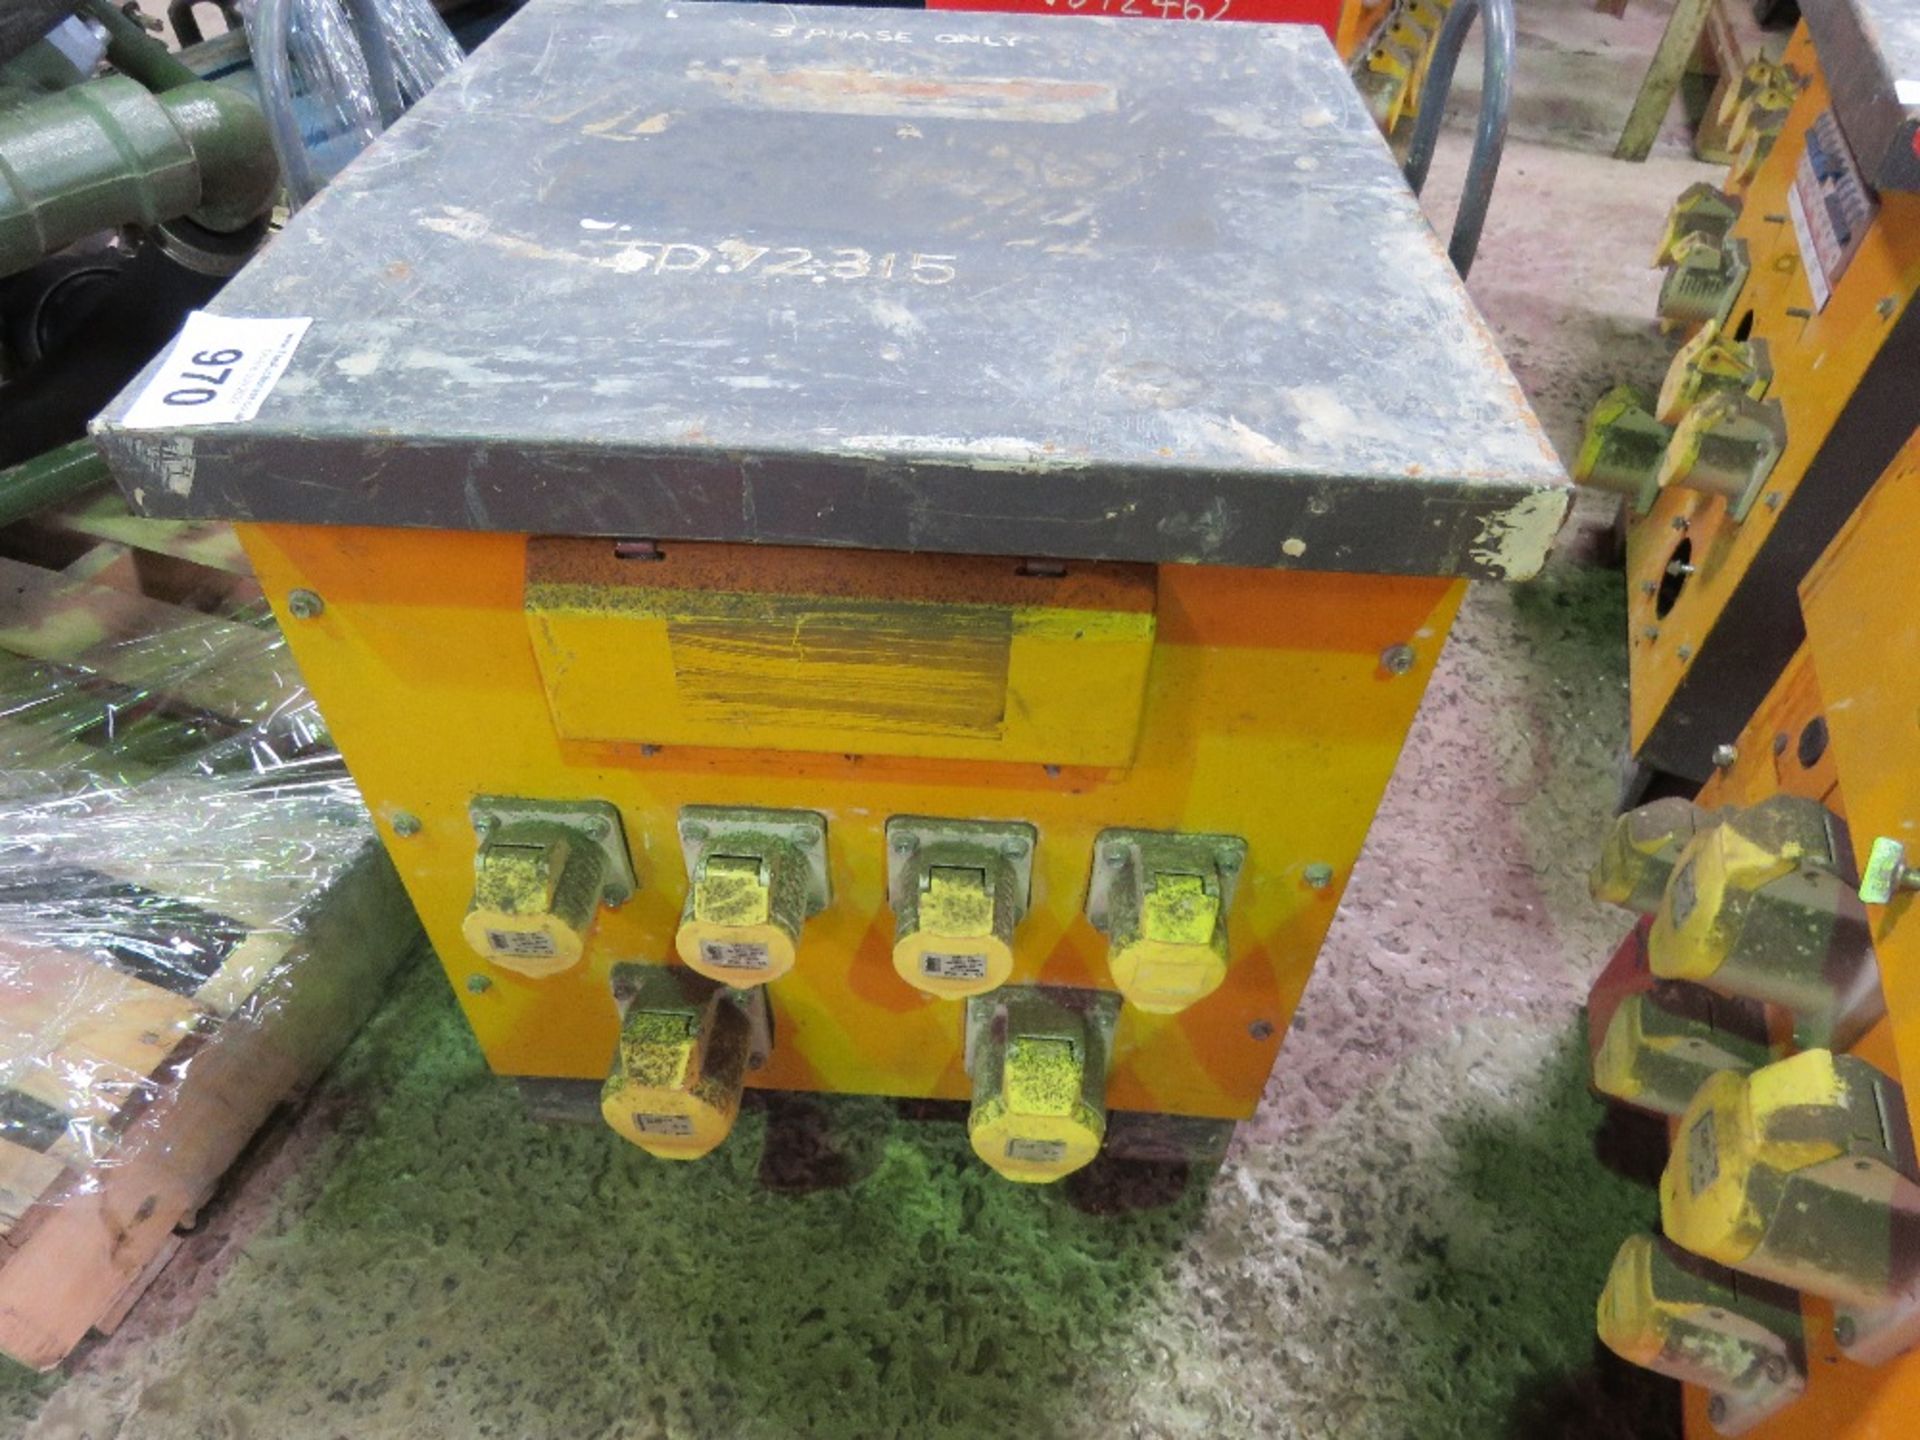 LARGE OUTPUT SITE TRANSFORMER. DIRECT FROM A LOCAL GROUNDWORKS COMPANY AS PART OF THEIR RESTRUCTU - Image 2 of 2